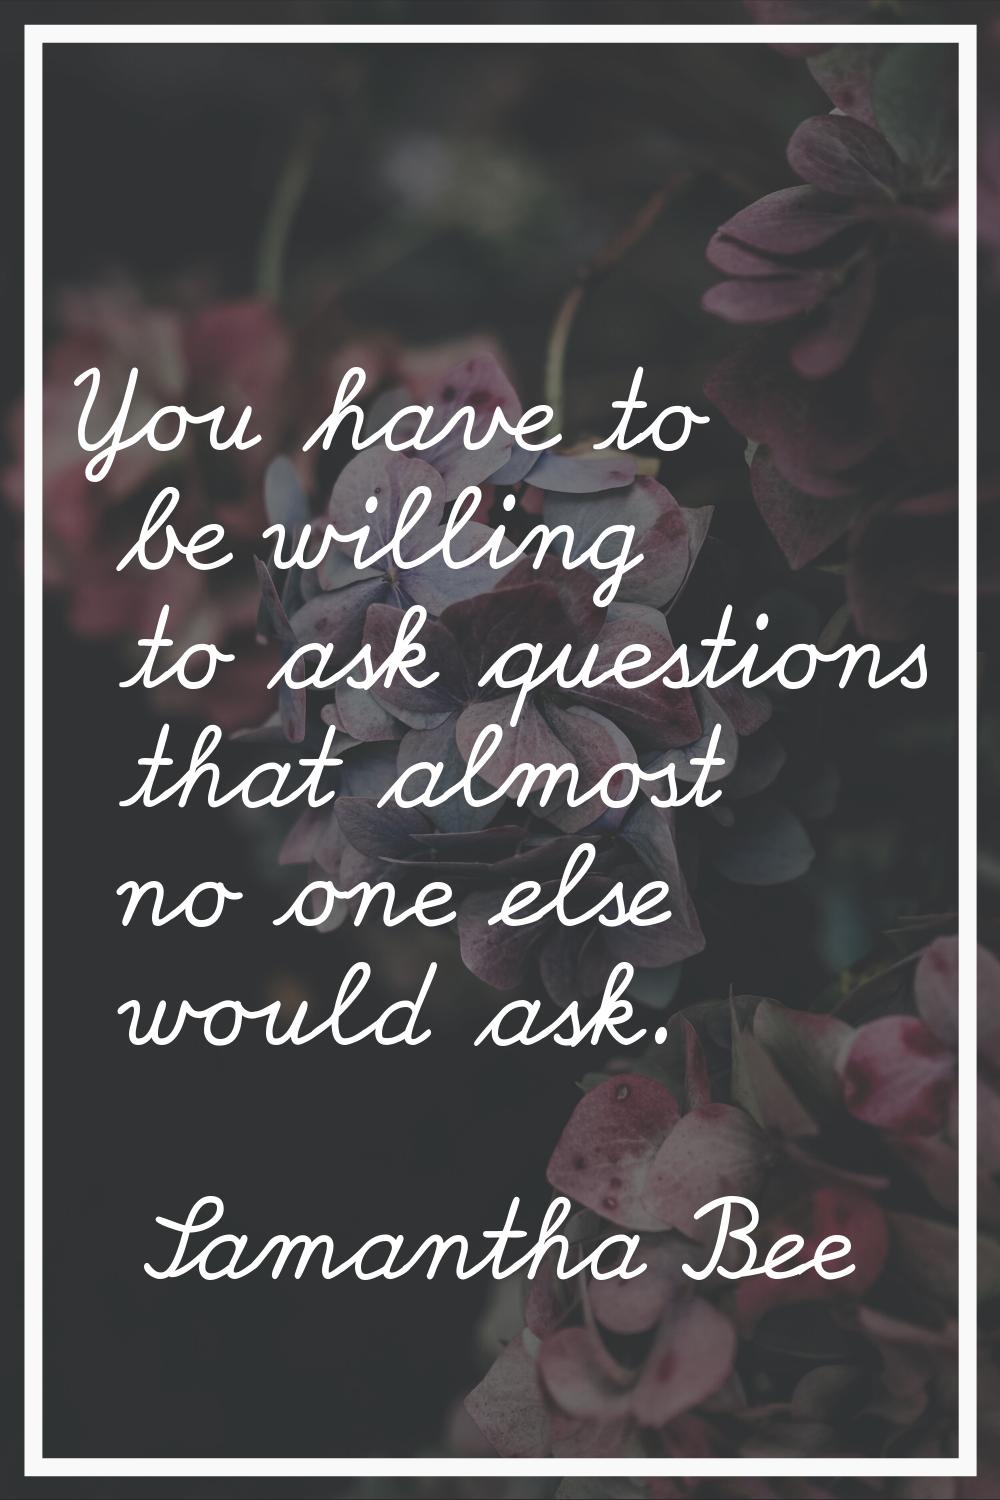 You have to be willing to ask questions that almost no one else would ask.